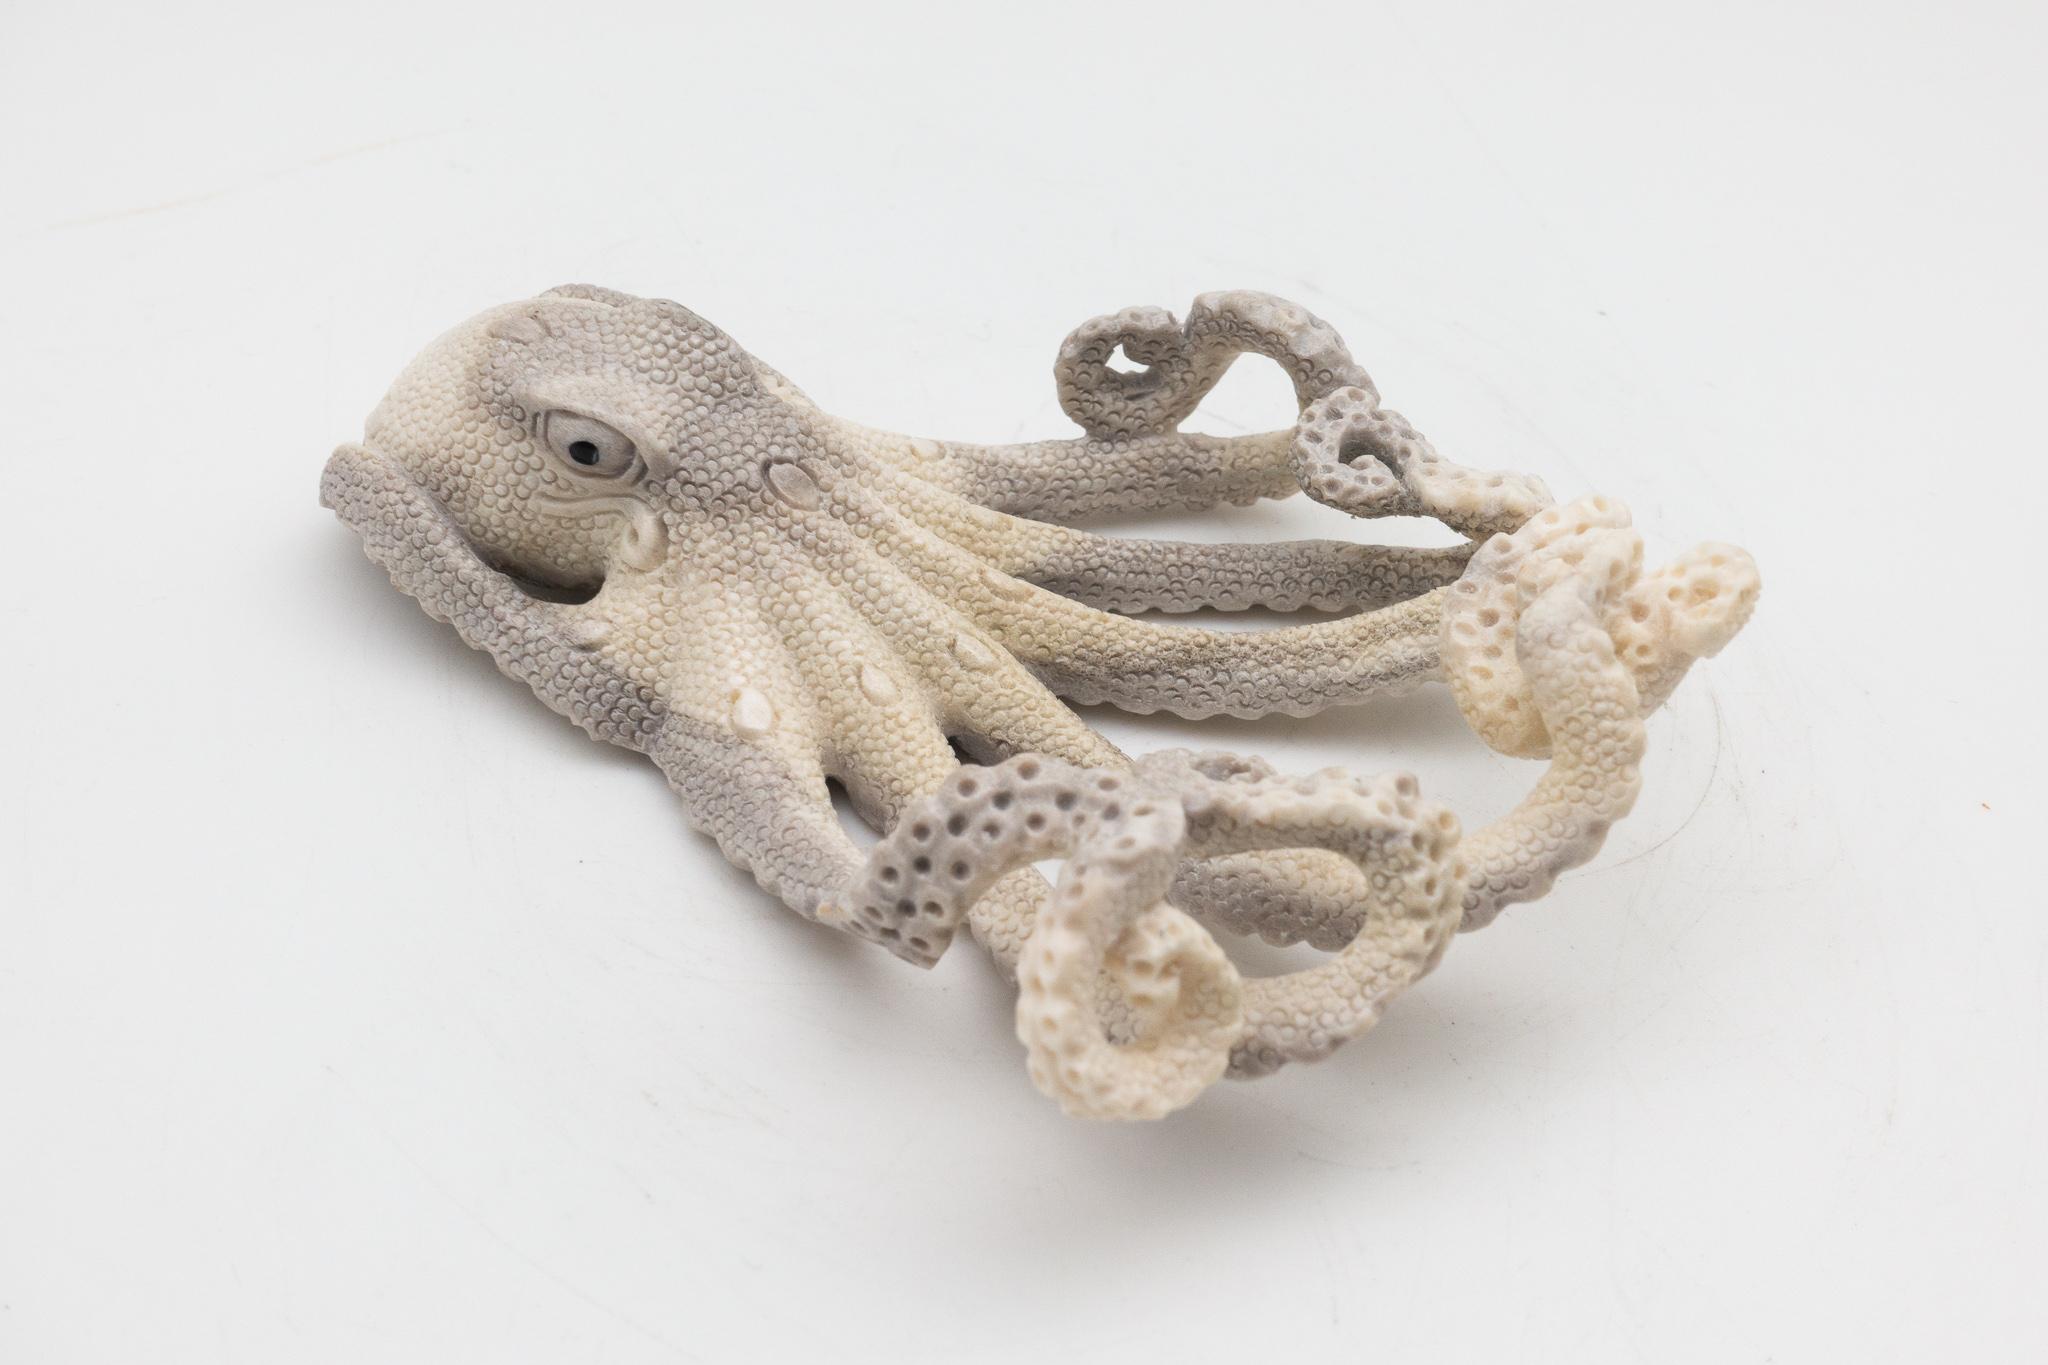 Contemporary North American Moose Antler Carving of Octopus